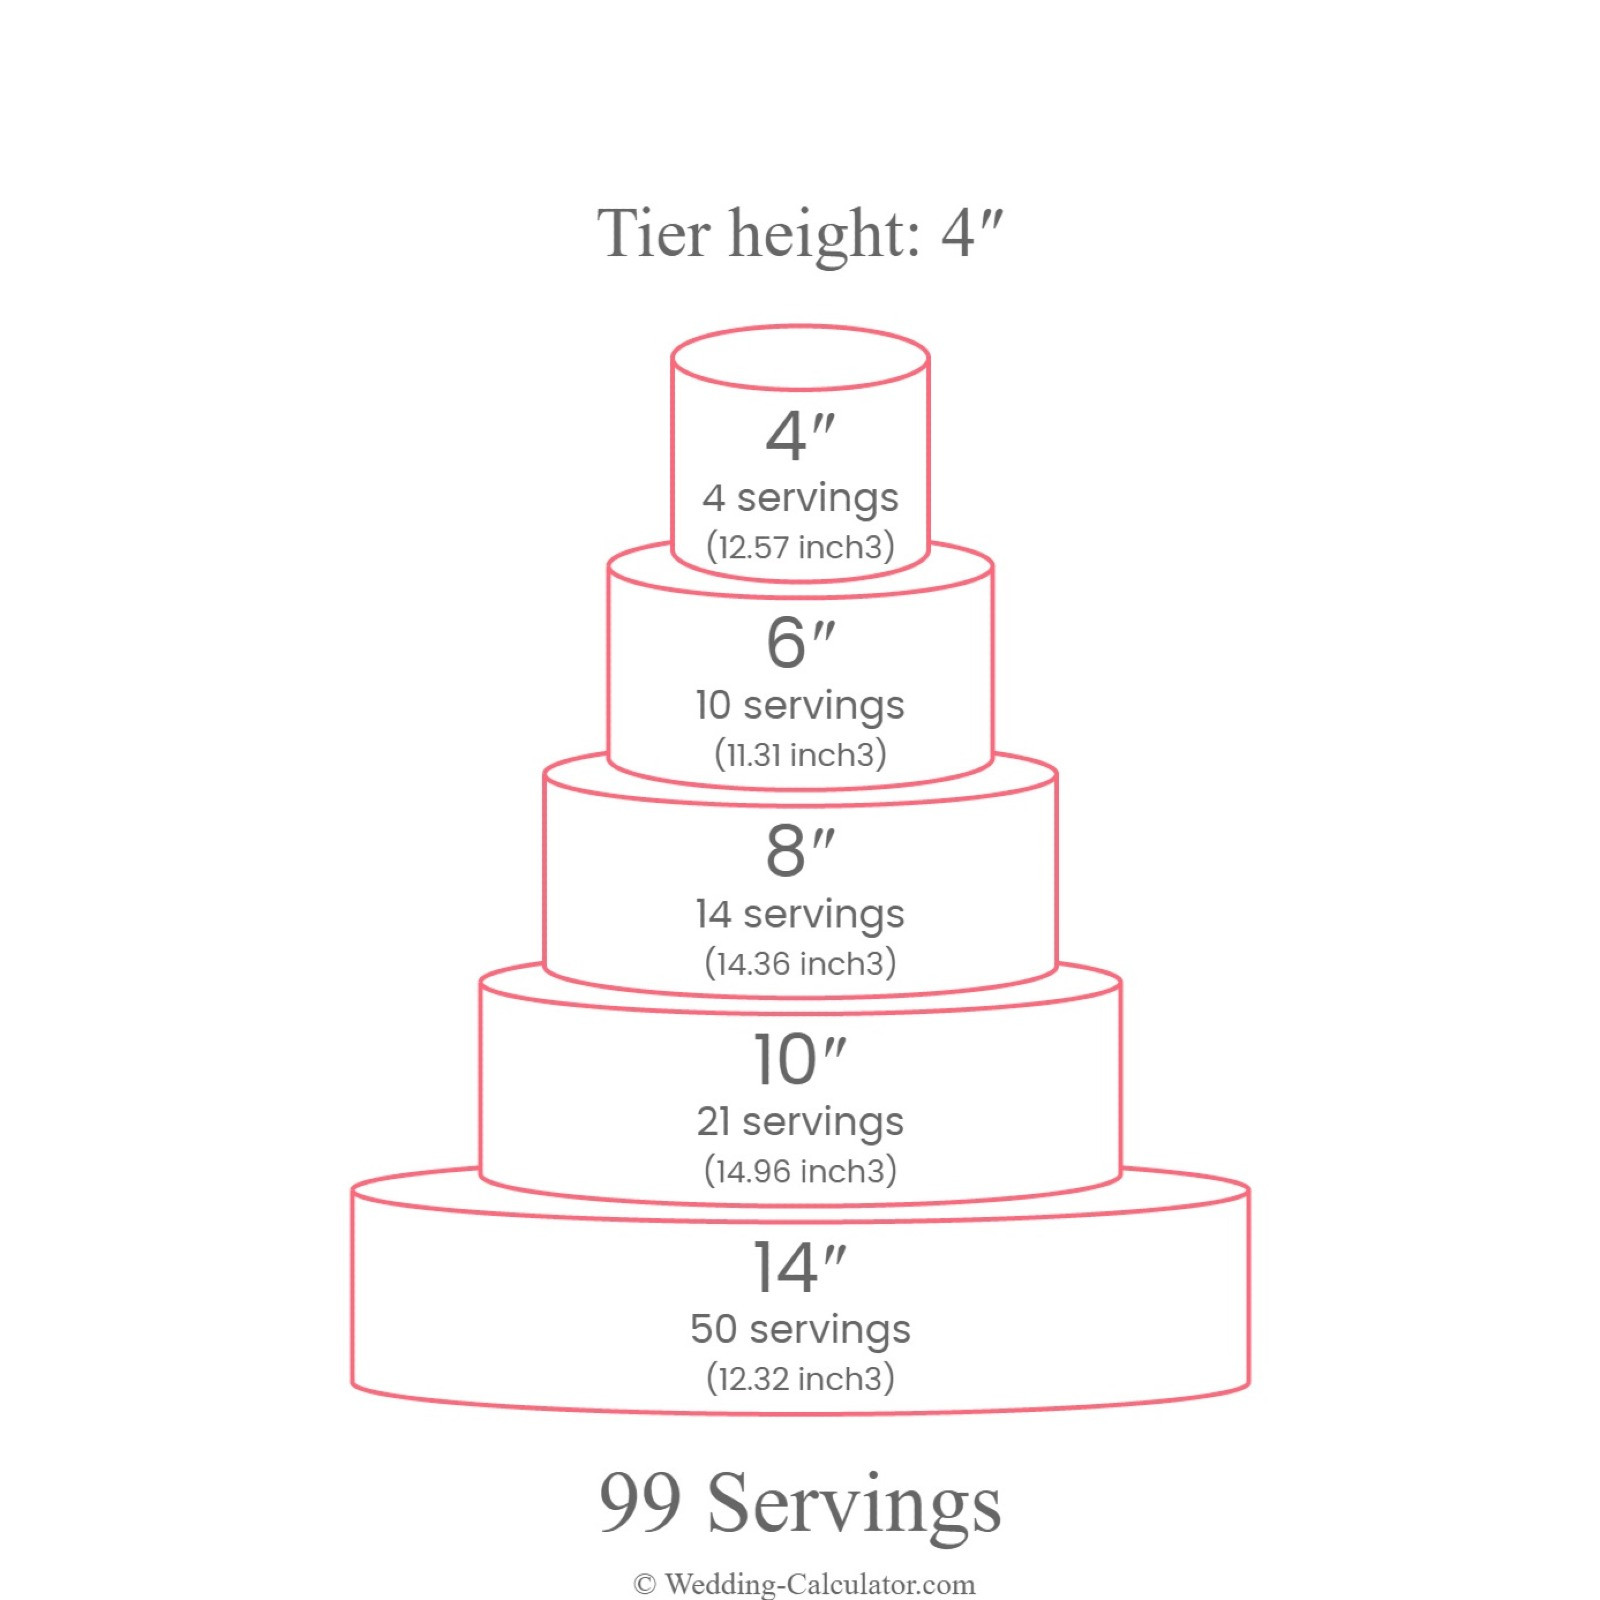 Another wedding cake size for 100 people